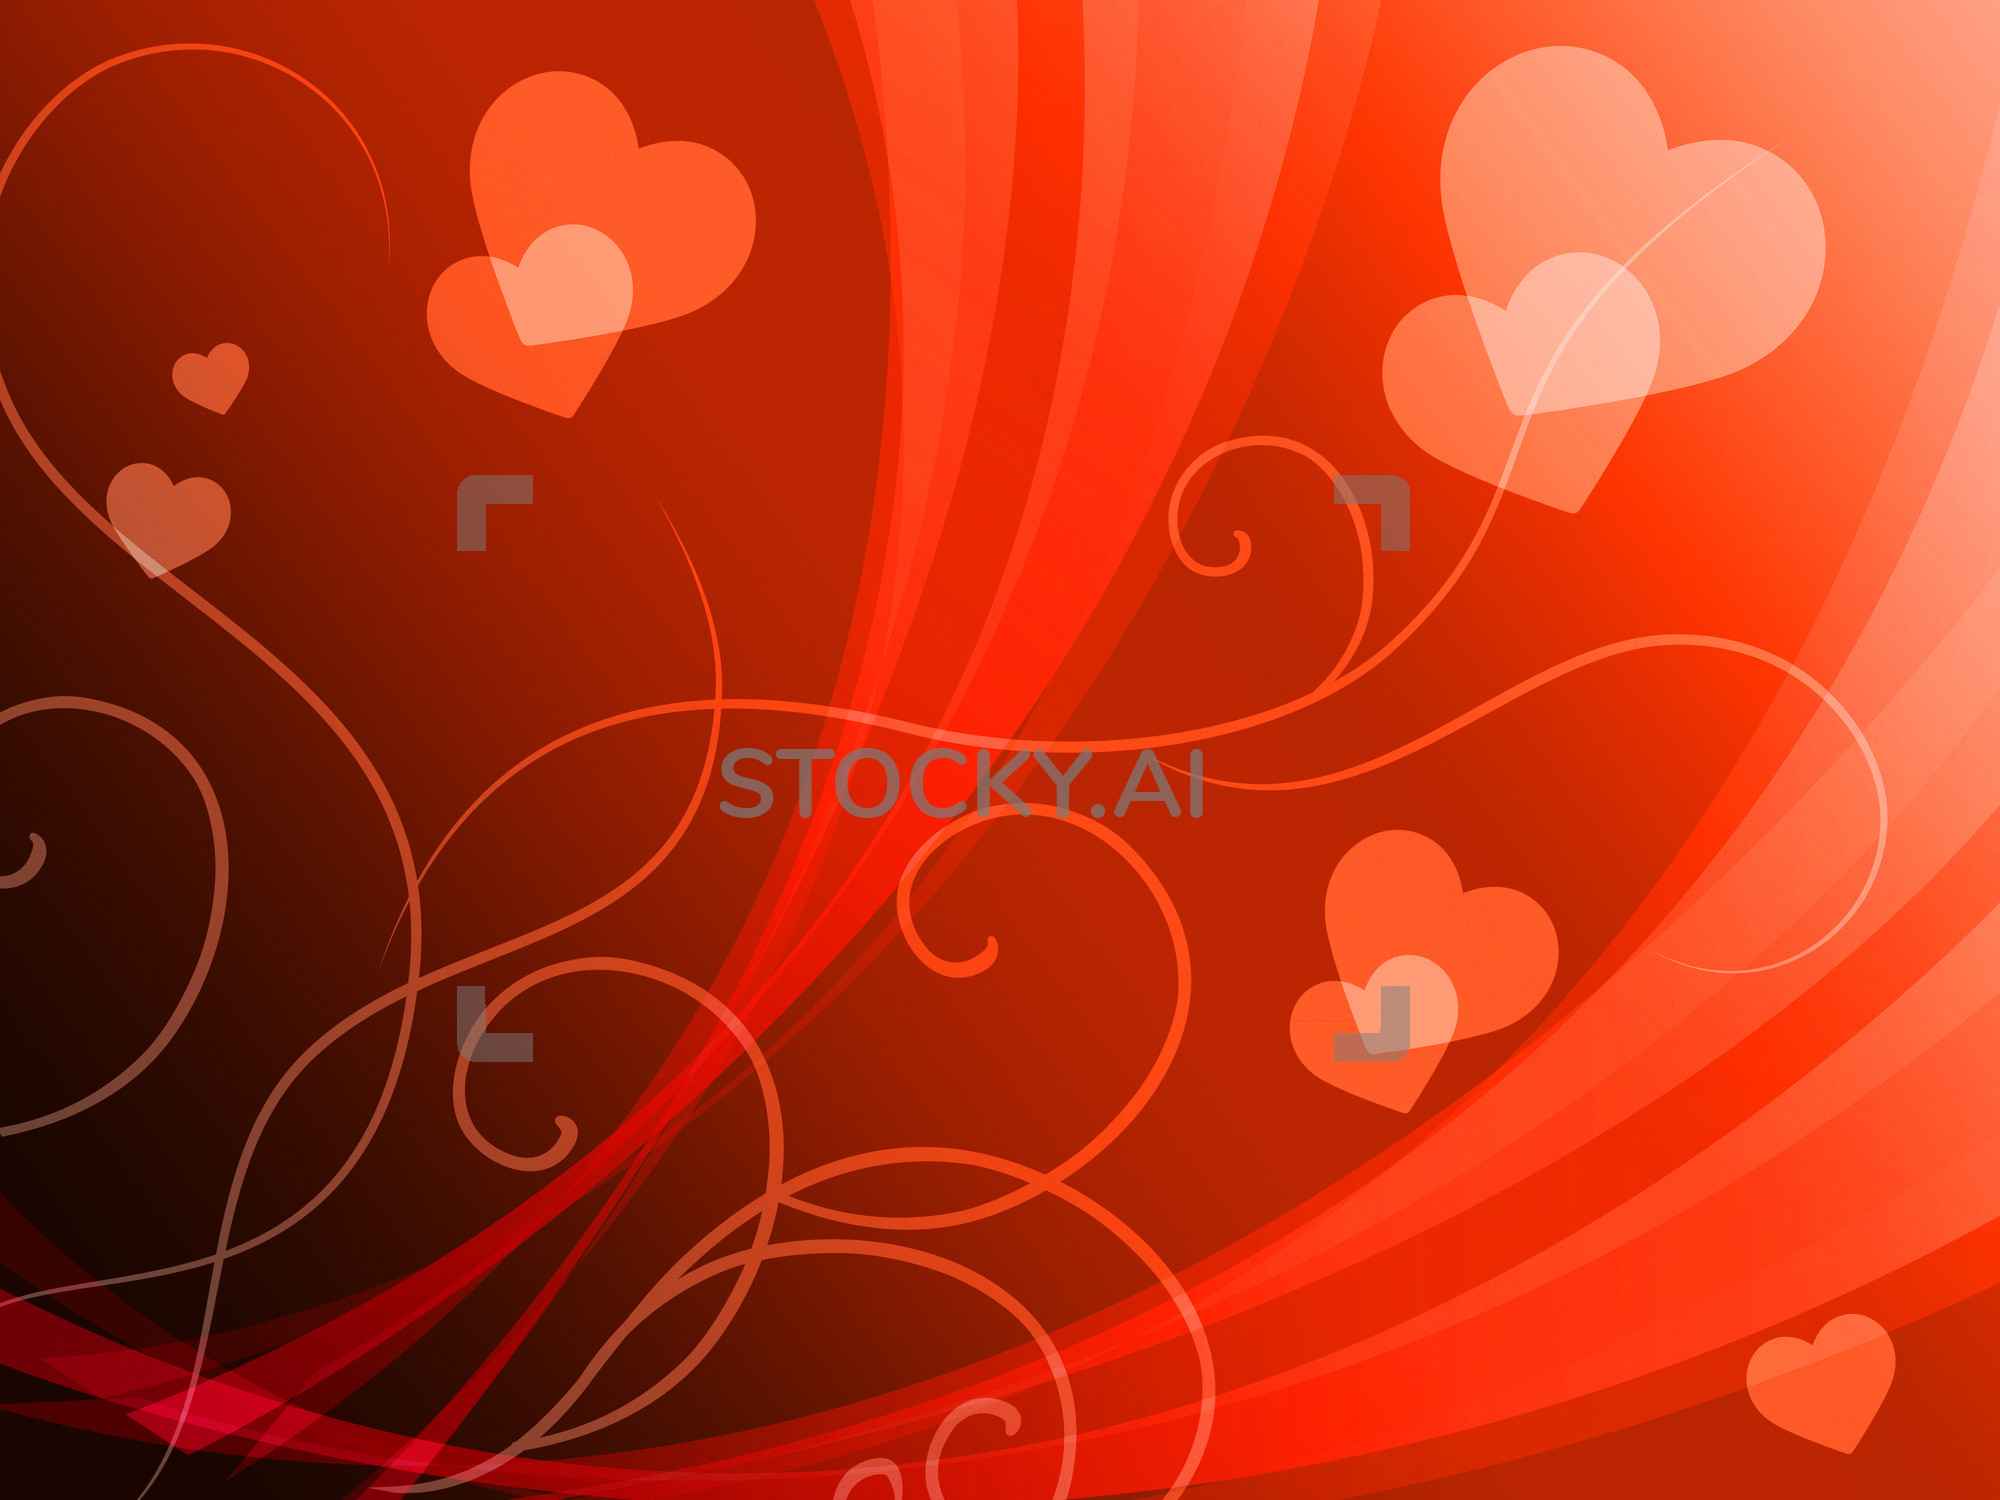 2000x1500 Image of Elegant Hearts Background Shows Delicate Romantic Wallpaper